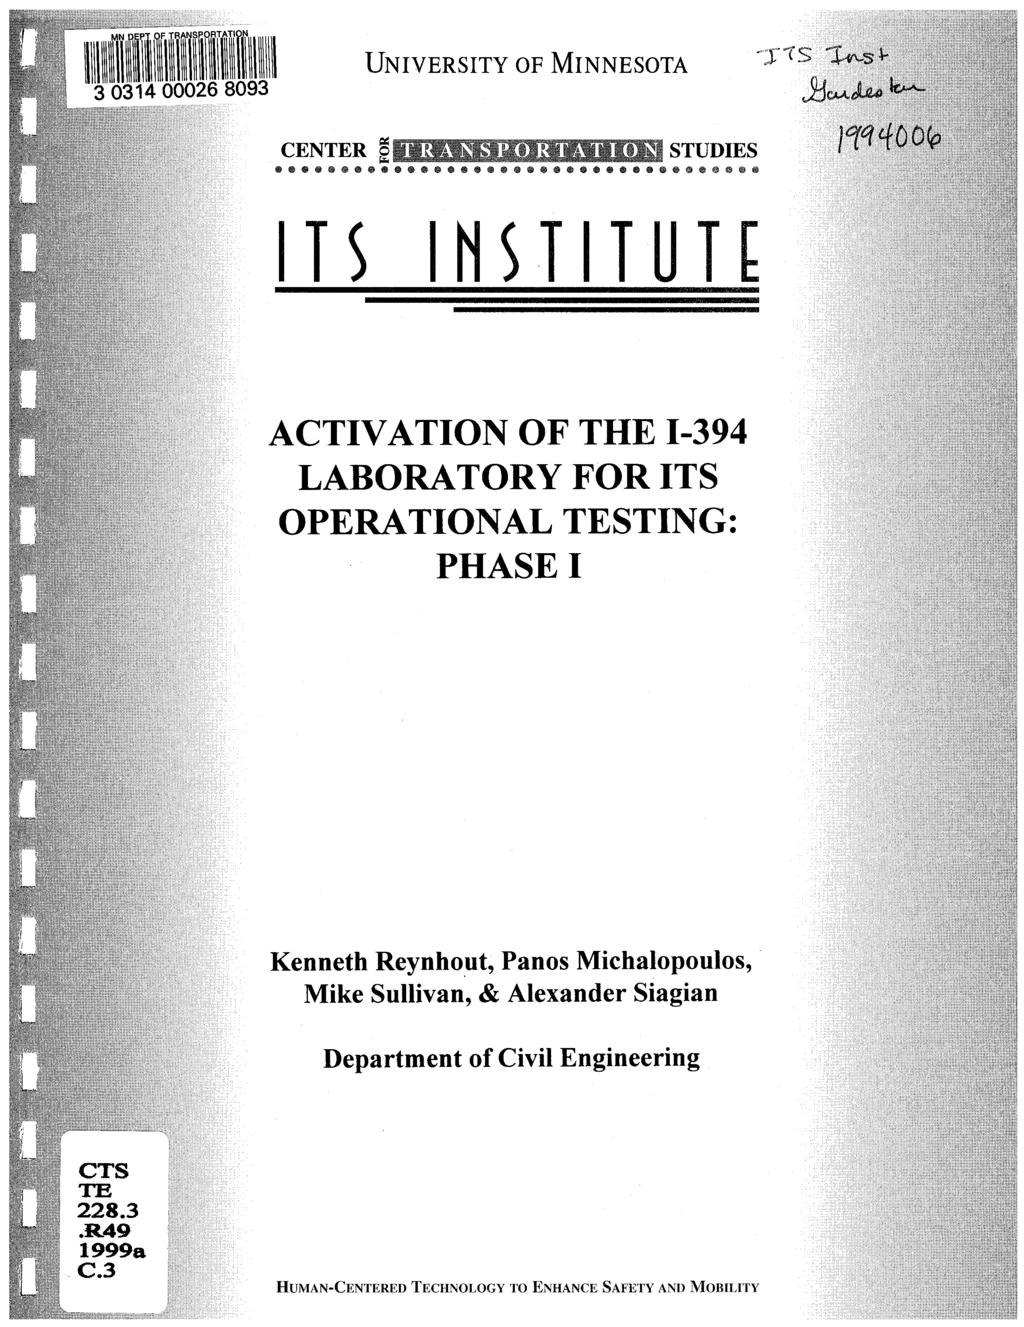 UNIVERSITY OF MINNESOTA CENTER O @@@@@@O@@@@ OO@@@@@@O@@@@@@@@@ @@@ STUDIES TS INST TUTE LCTIVATION OF THE 1-394 LABORATORY FOR ITS OPERATIONAL TESTING: PHASE I